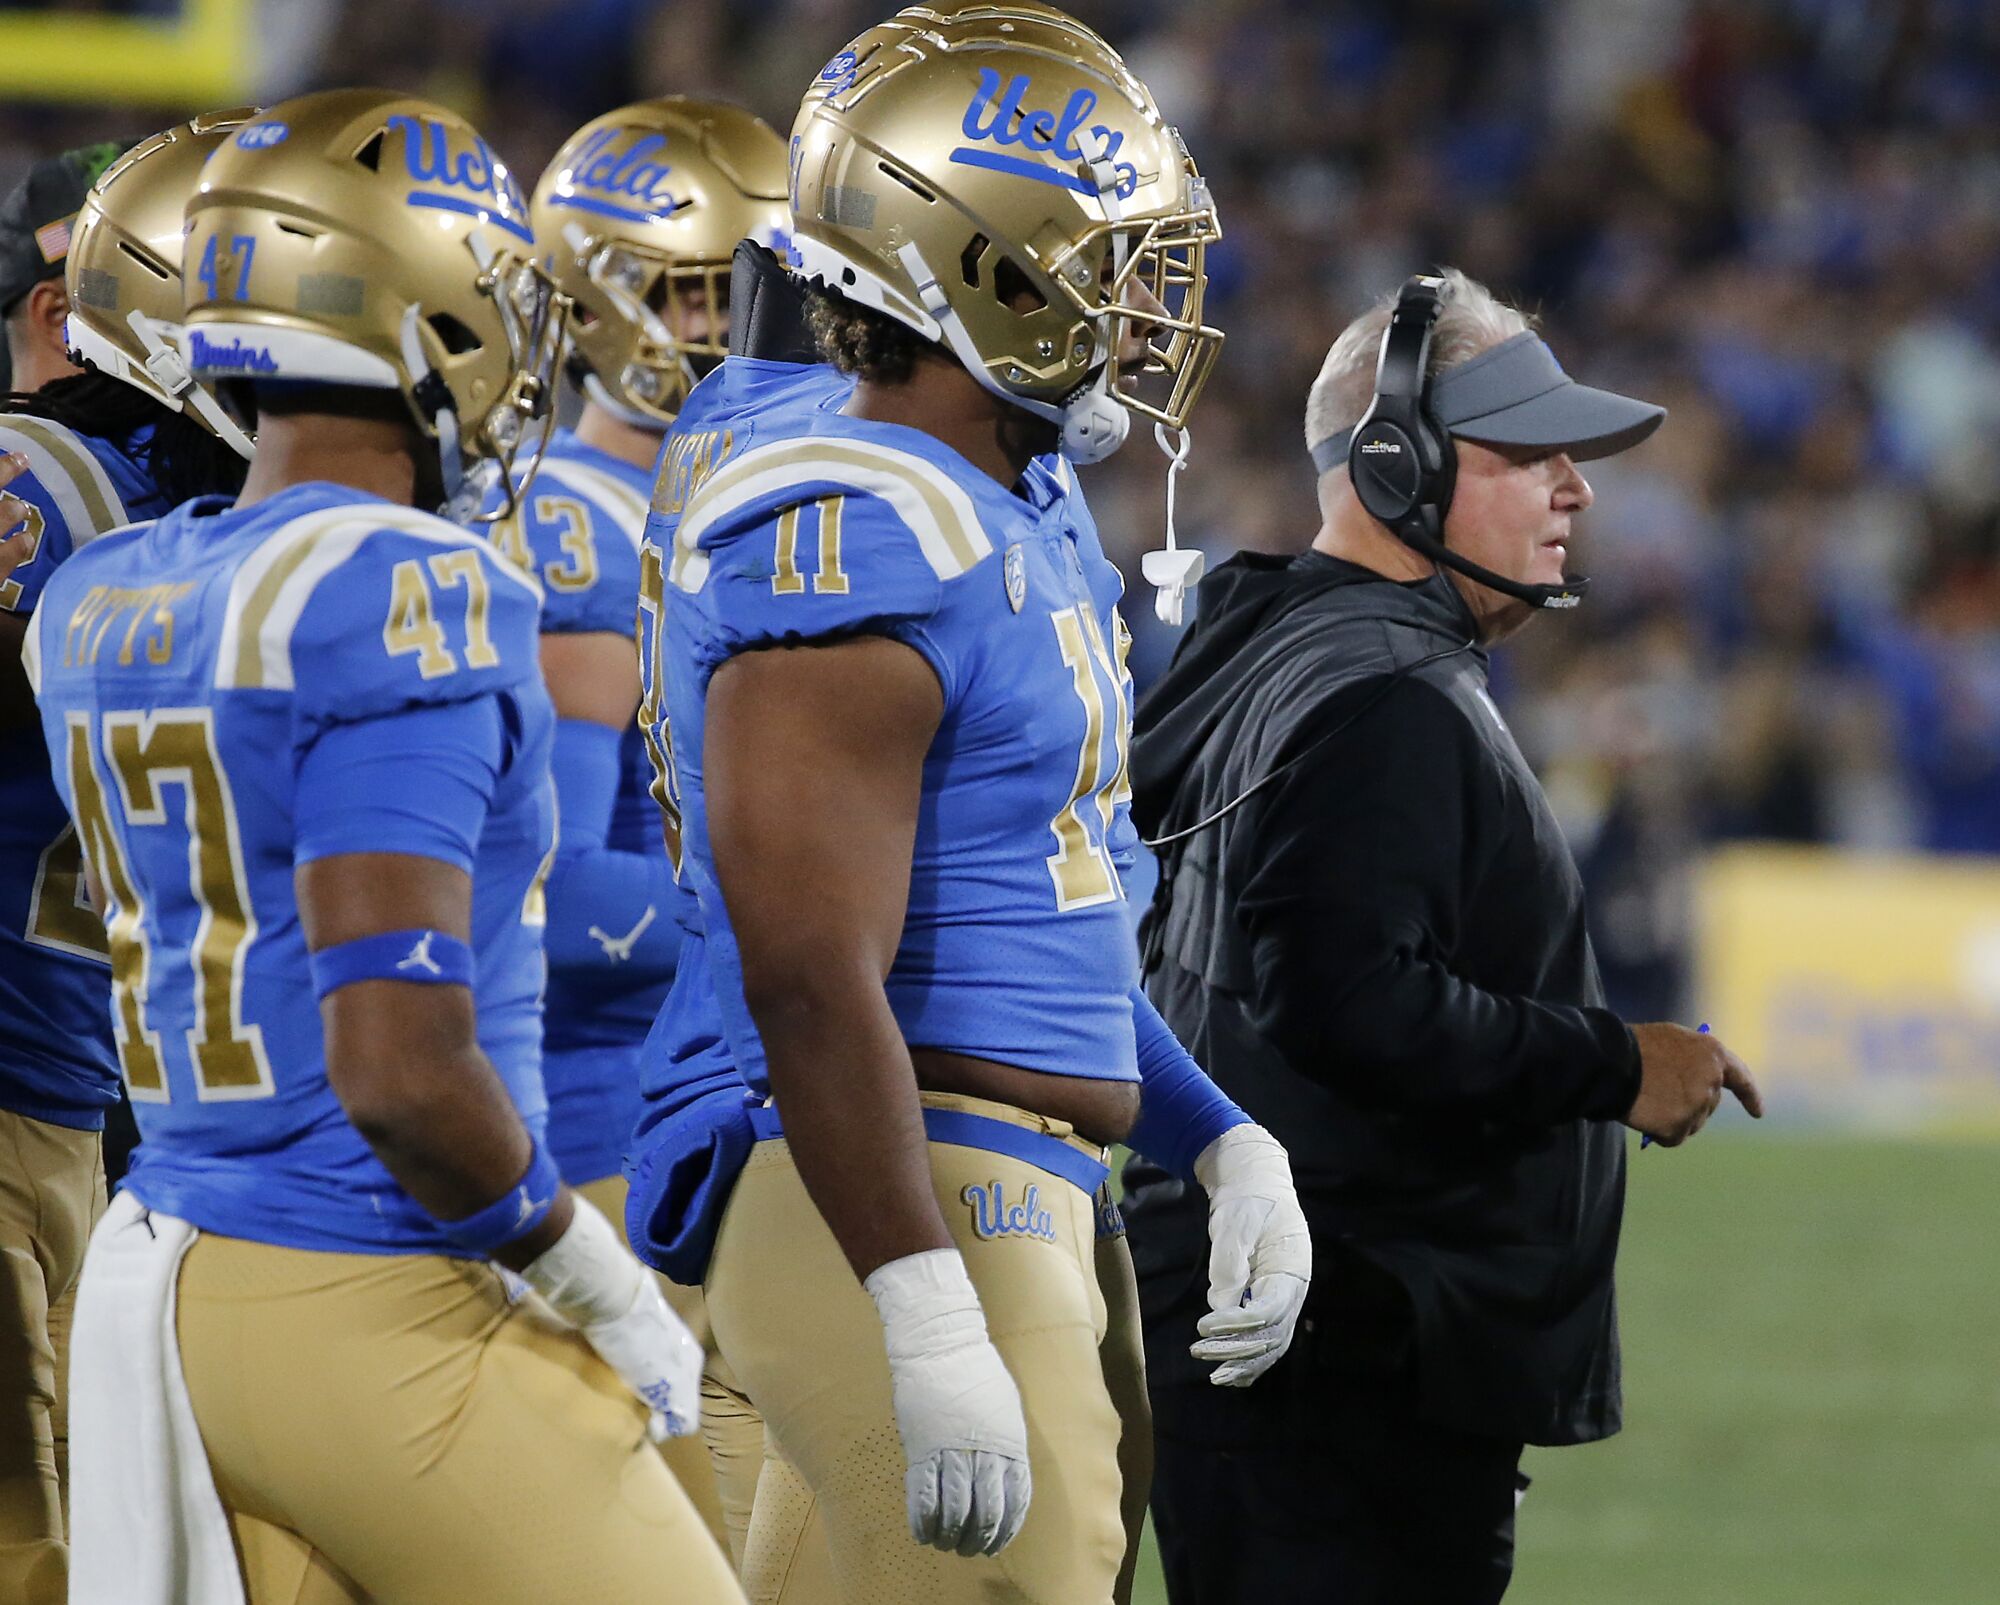 Chip Kelly and other UCLA players on the sideline.